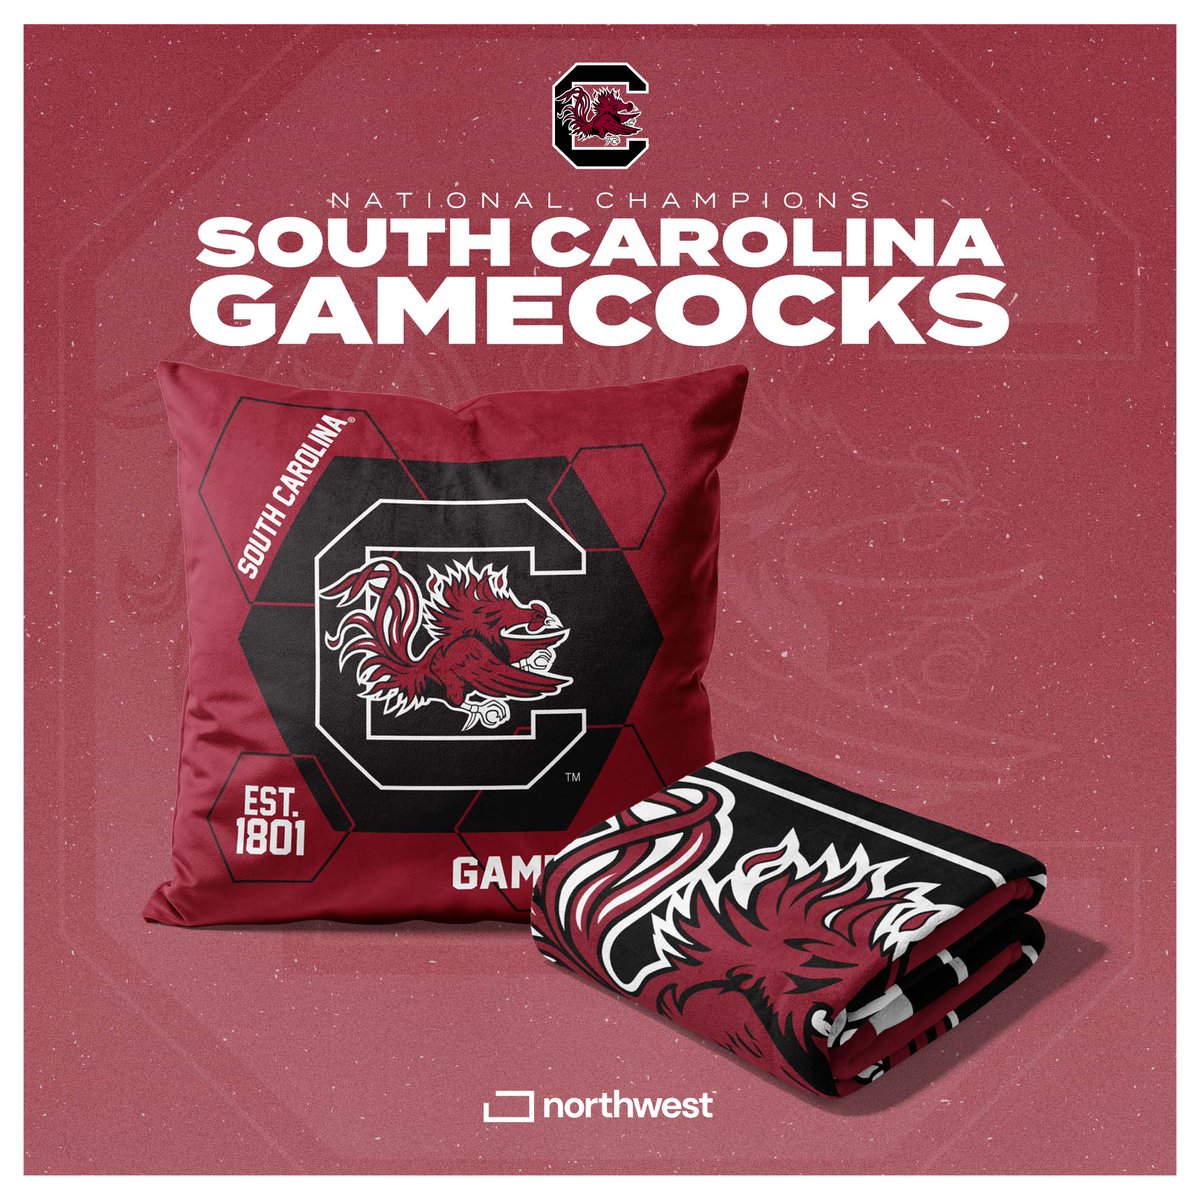 Congrats to @GamecockWBB on winning the National Championship!!! 🏆🏀 Celebrate their undefeated season by cozying up with our @UofSC throw blankets, pillows and more: bit.ly/3U87IKL #MarchMadness | #Gamecocks | #Northwest